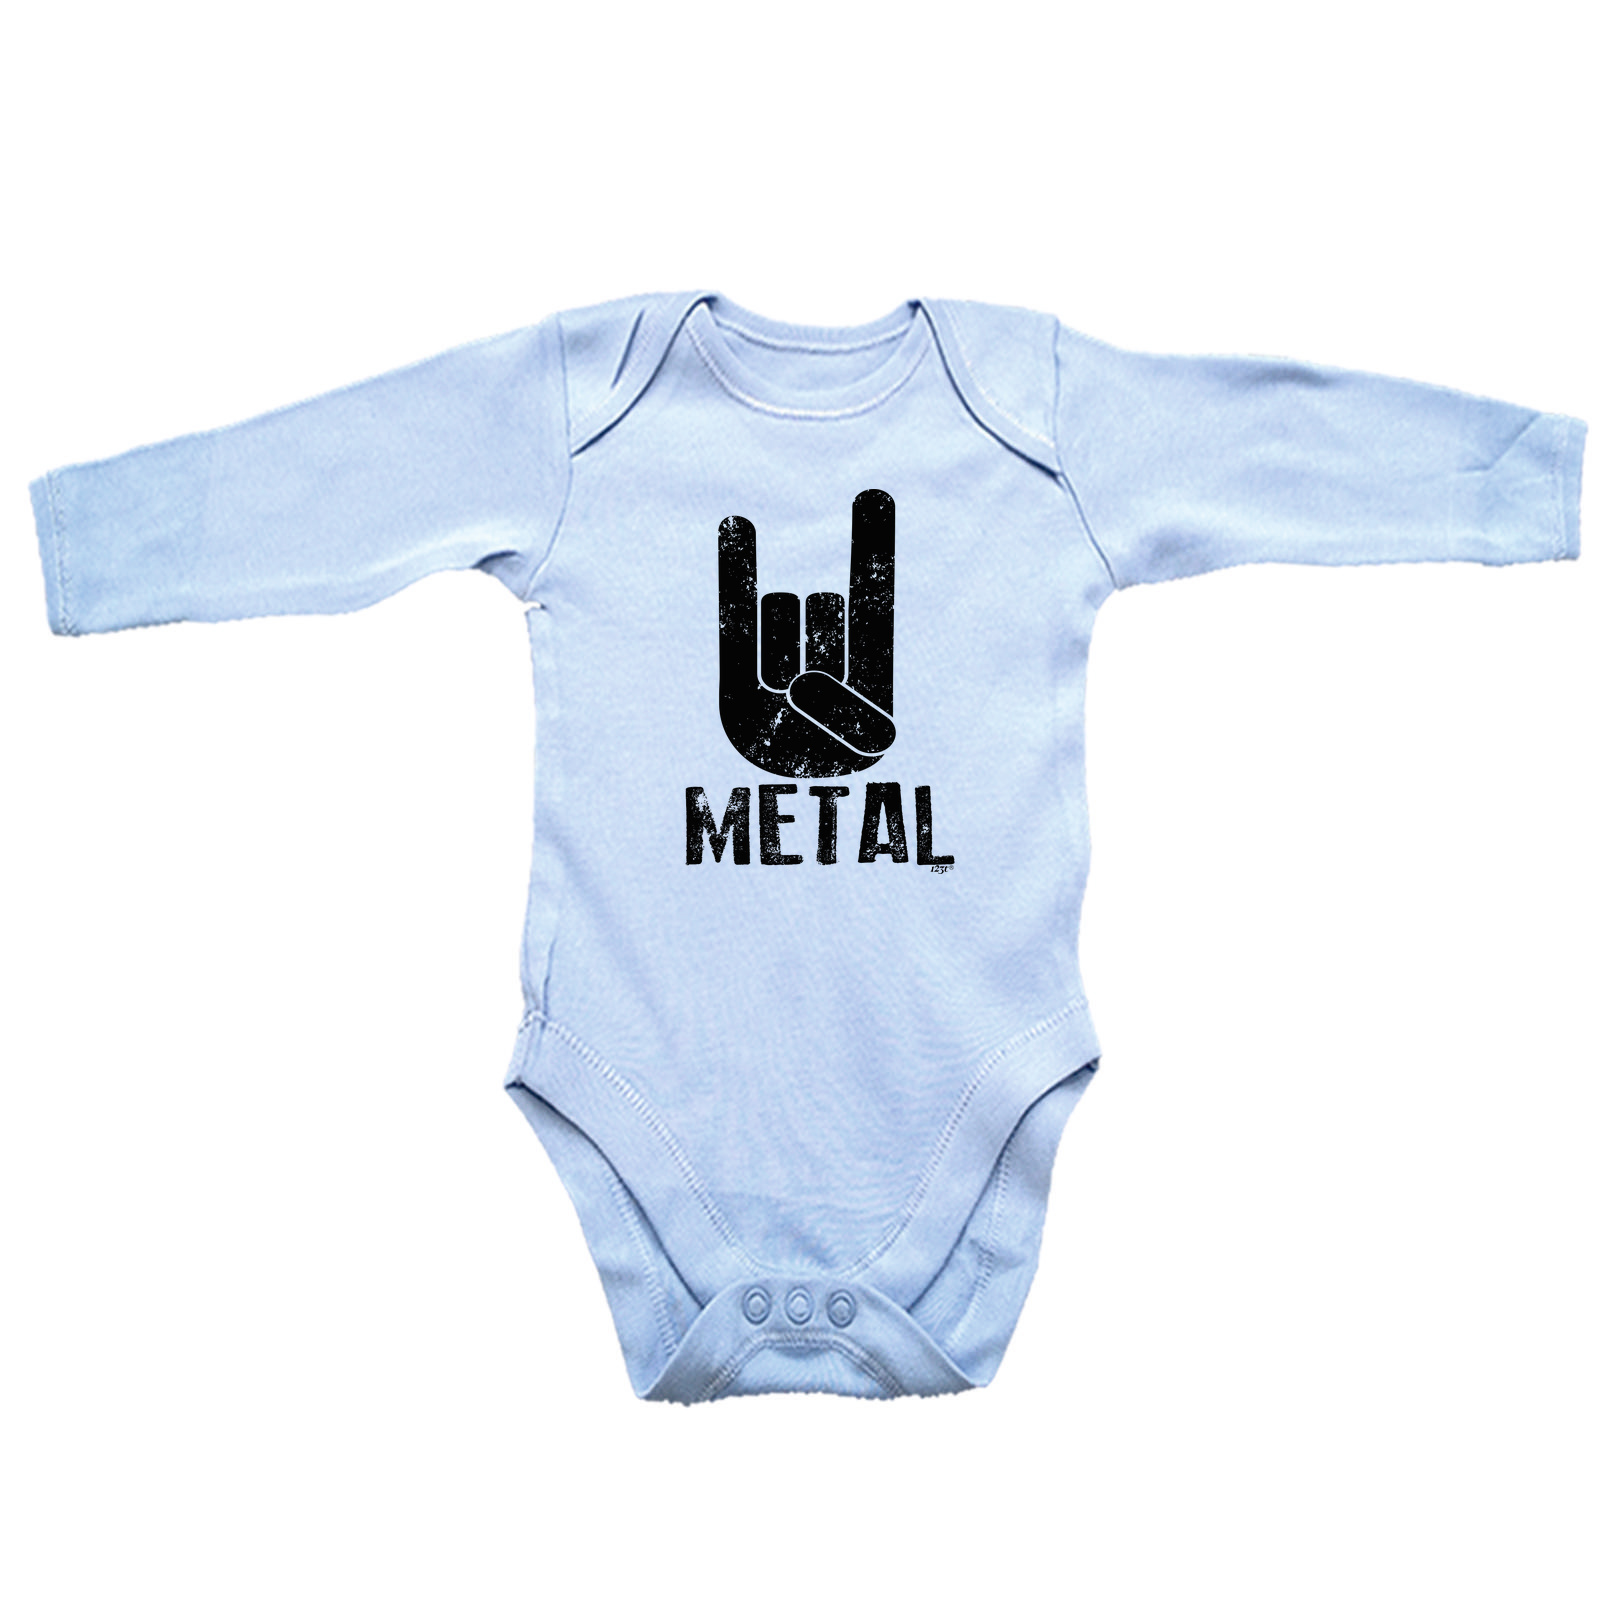 123t Funny Novelty Babygrow Jumpsuit Romper Pajamas Christmas s Gift Babygrows Brand 2119 Suit Baby 